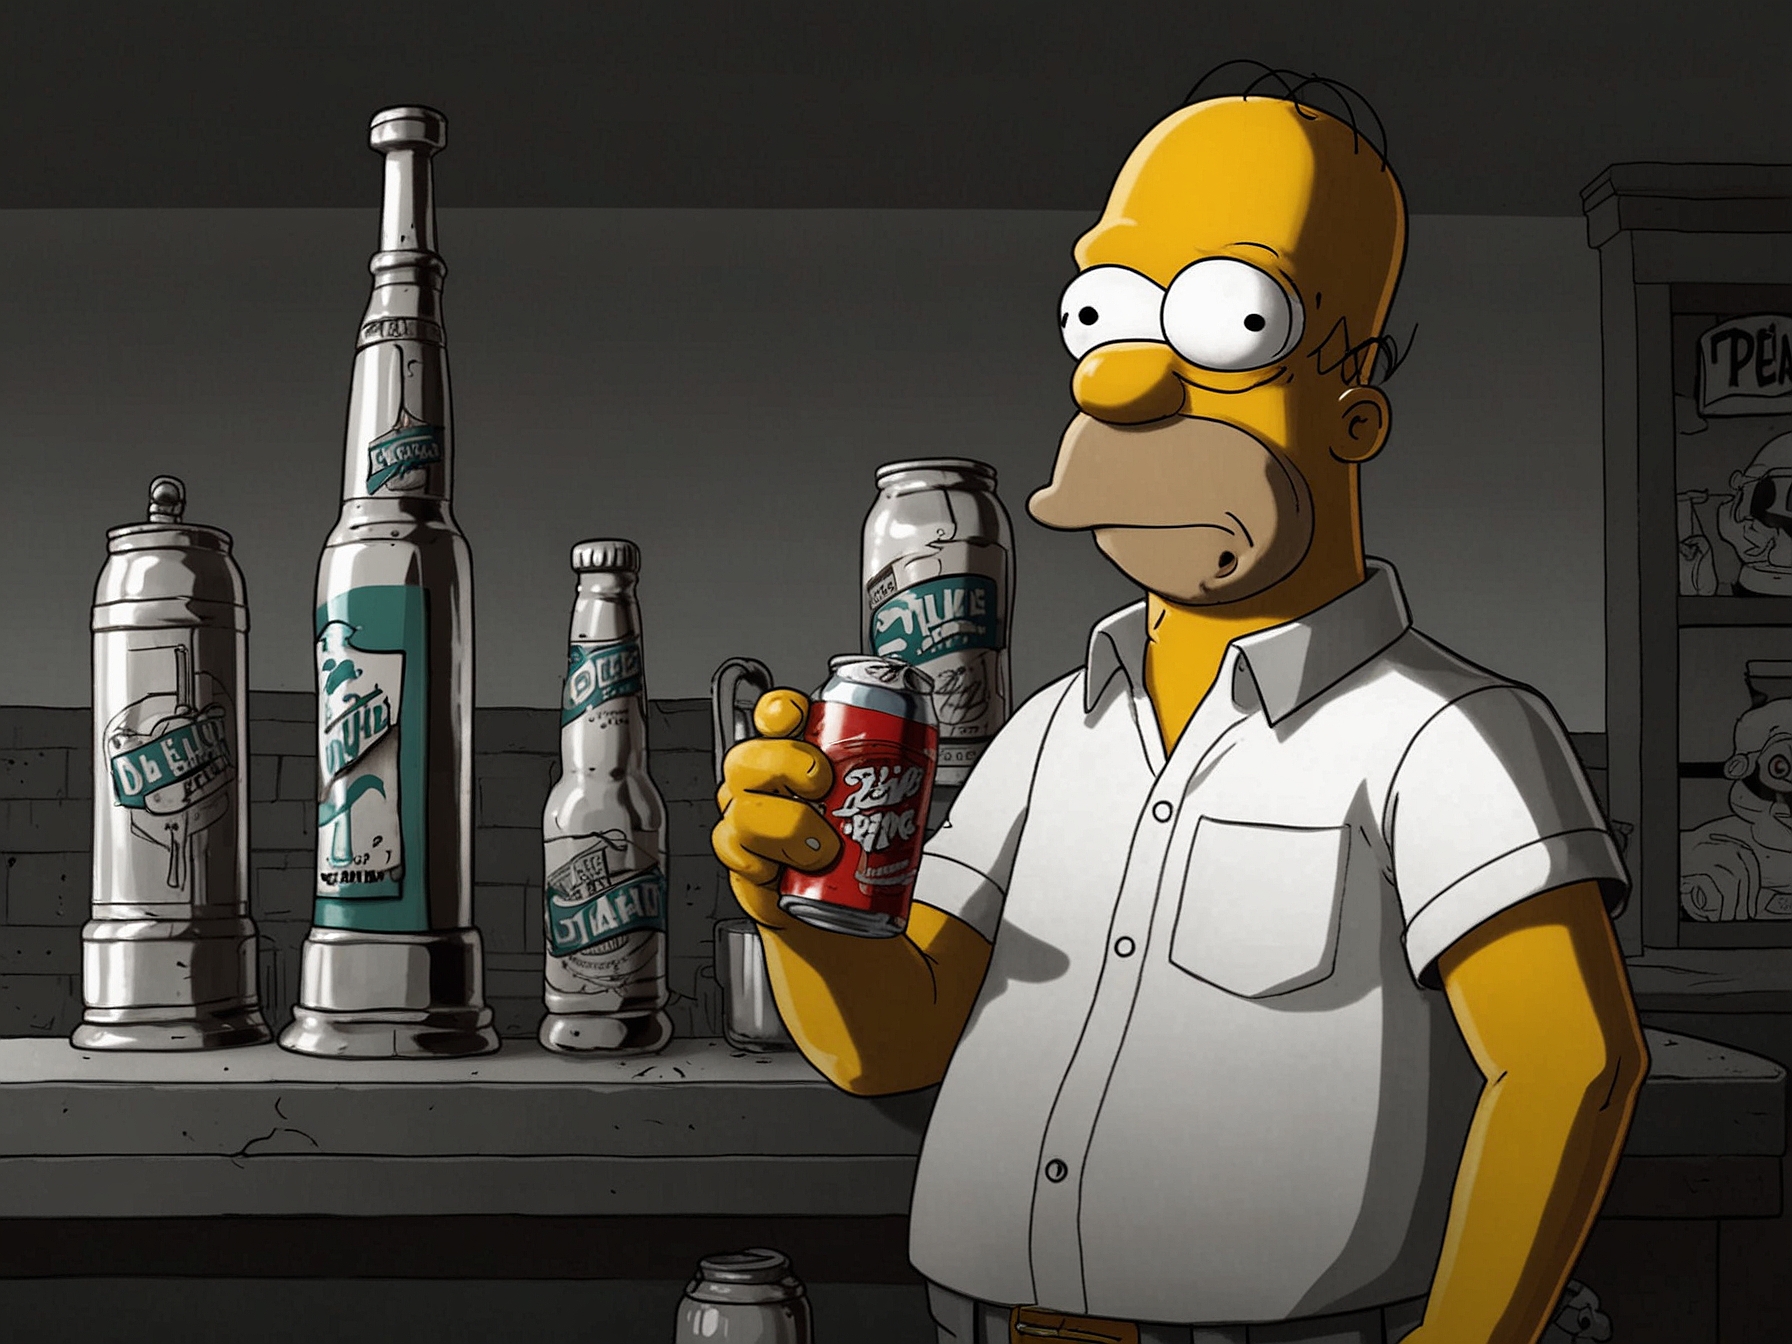 A scene from The Simpsons with Homer Simpson holding a can of Duff Beer, showcasing the drink's recurring presence in the iconic animated series.